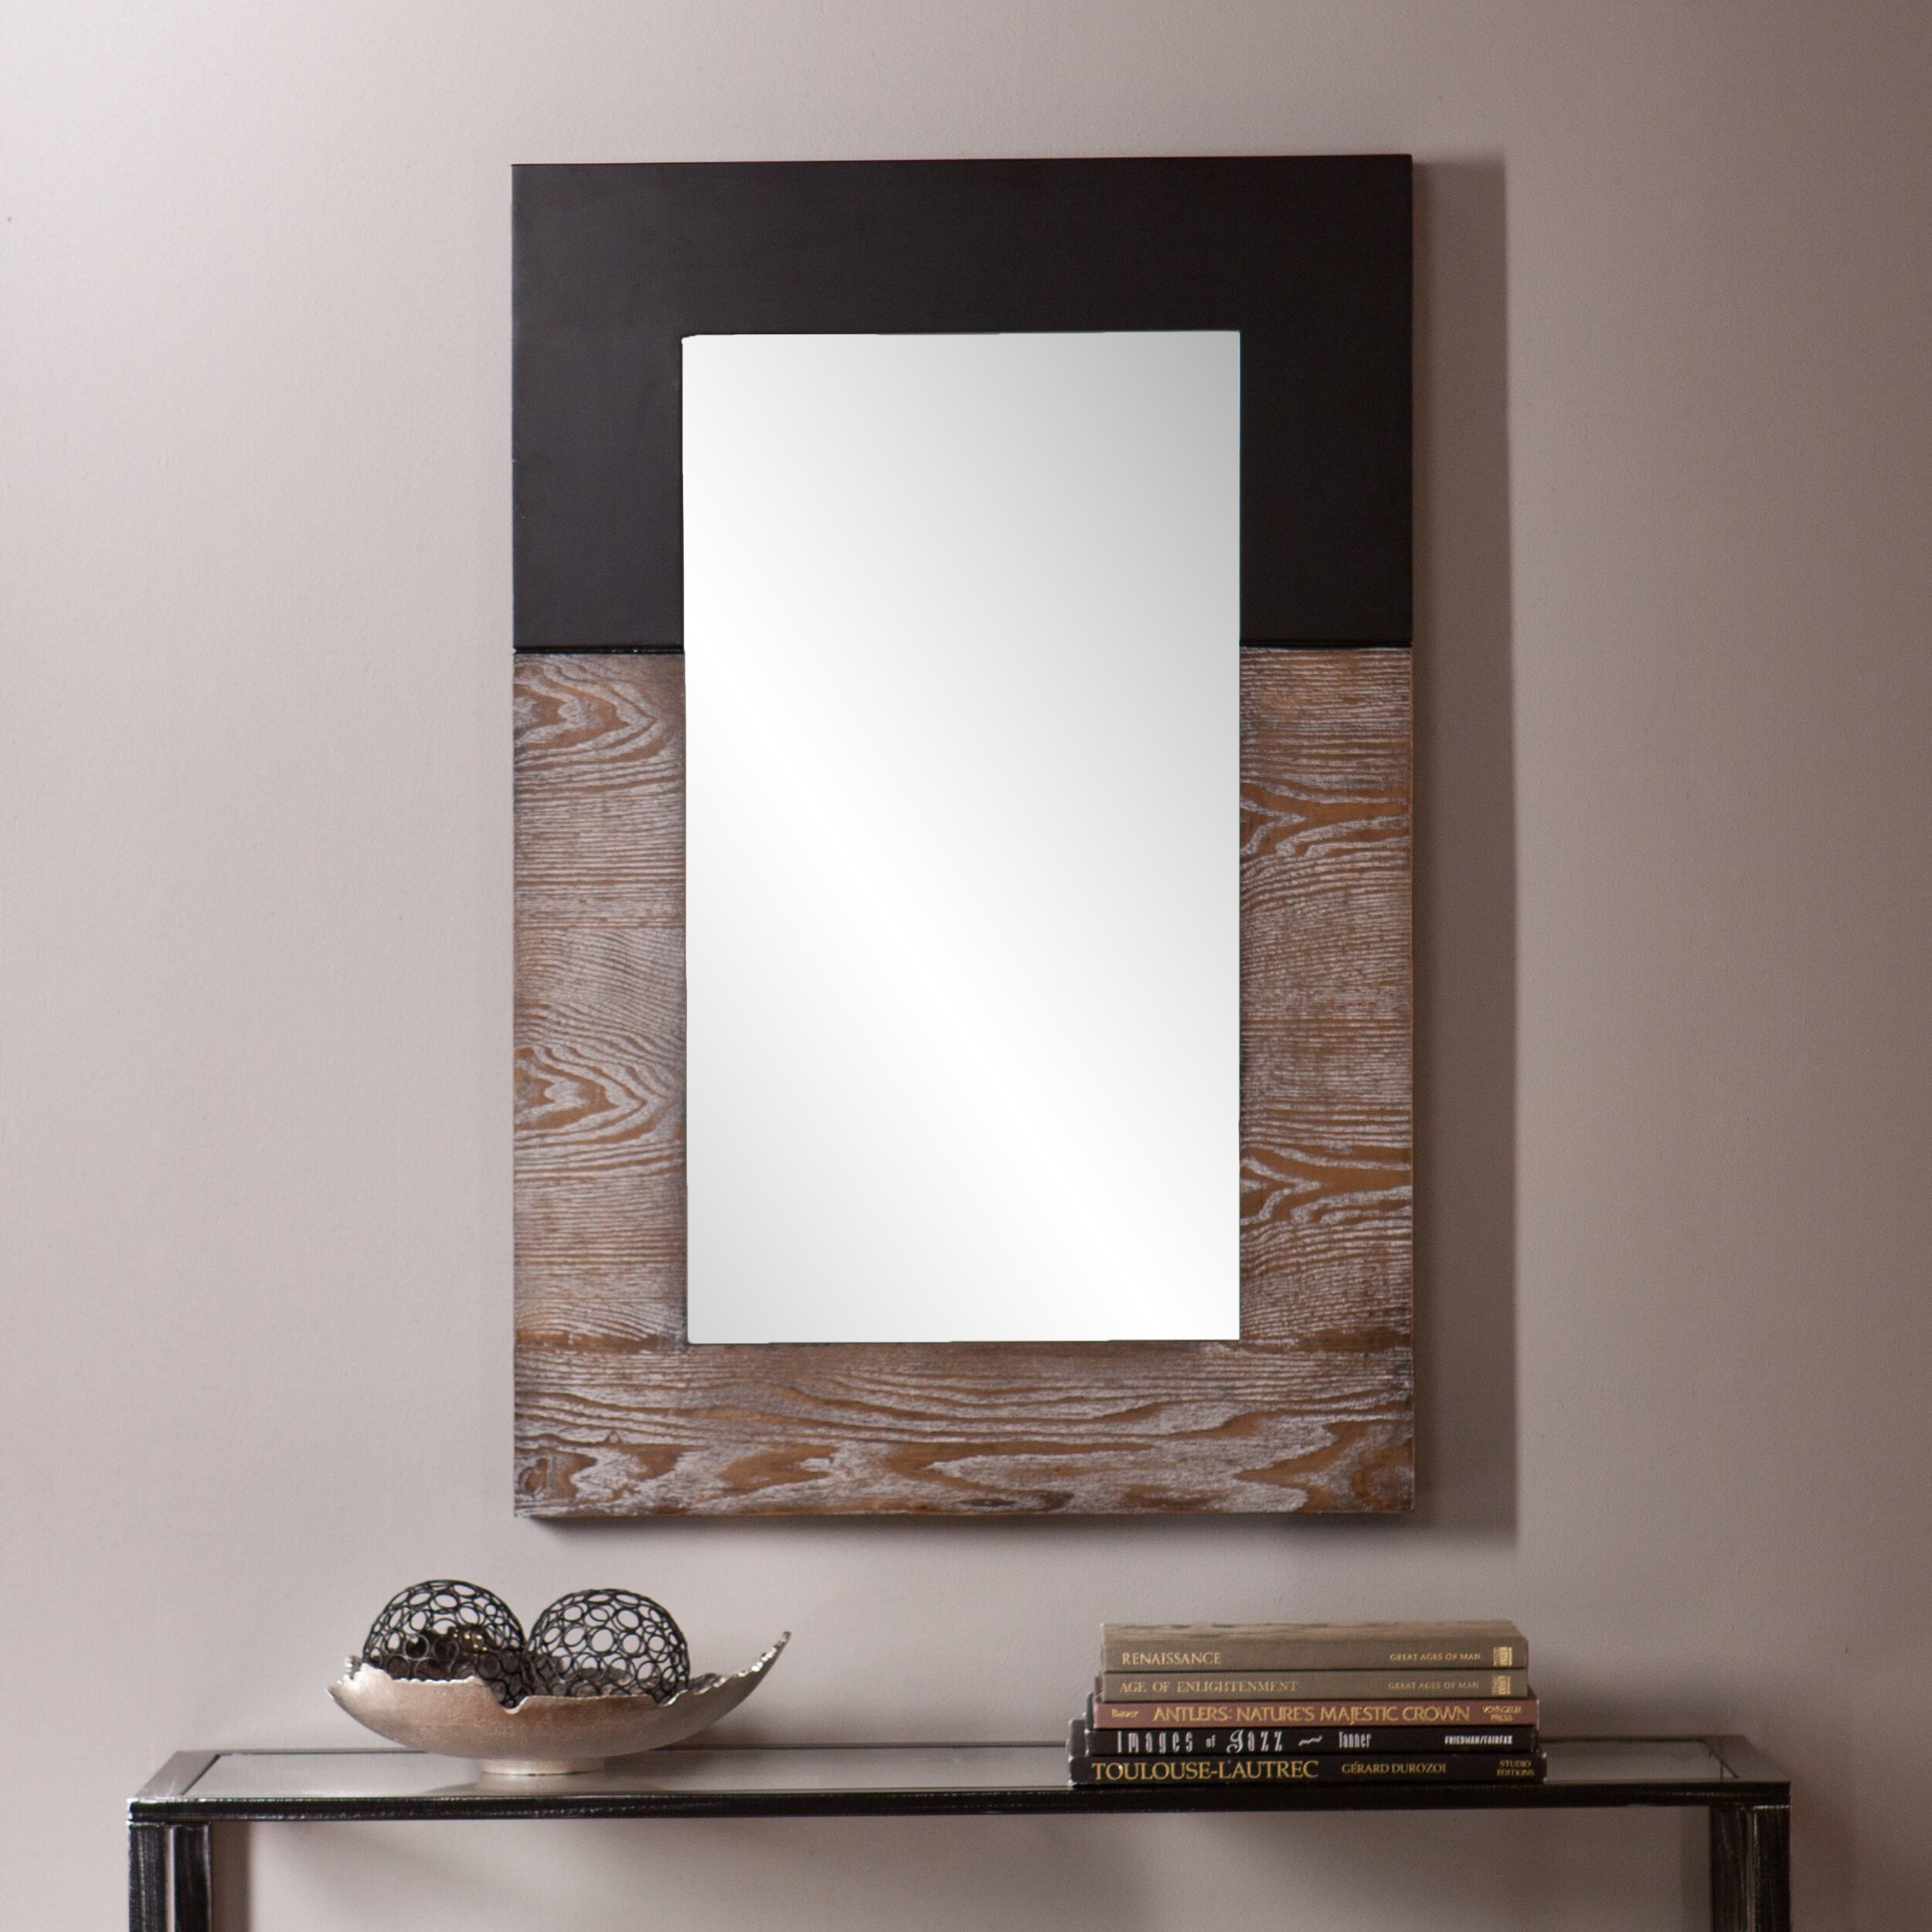 Rustic Wall Mirrors You'll Love | Wayfair - QUICK VIEW. Katlyn Wagars Mirror. by Union Rustic